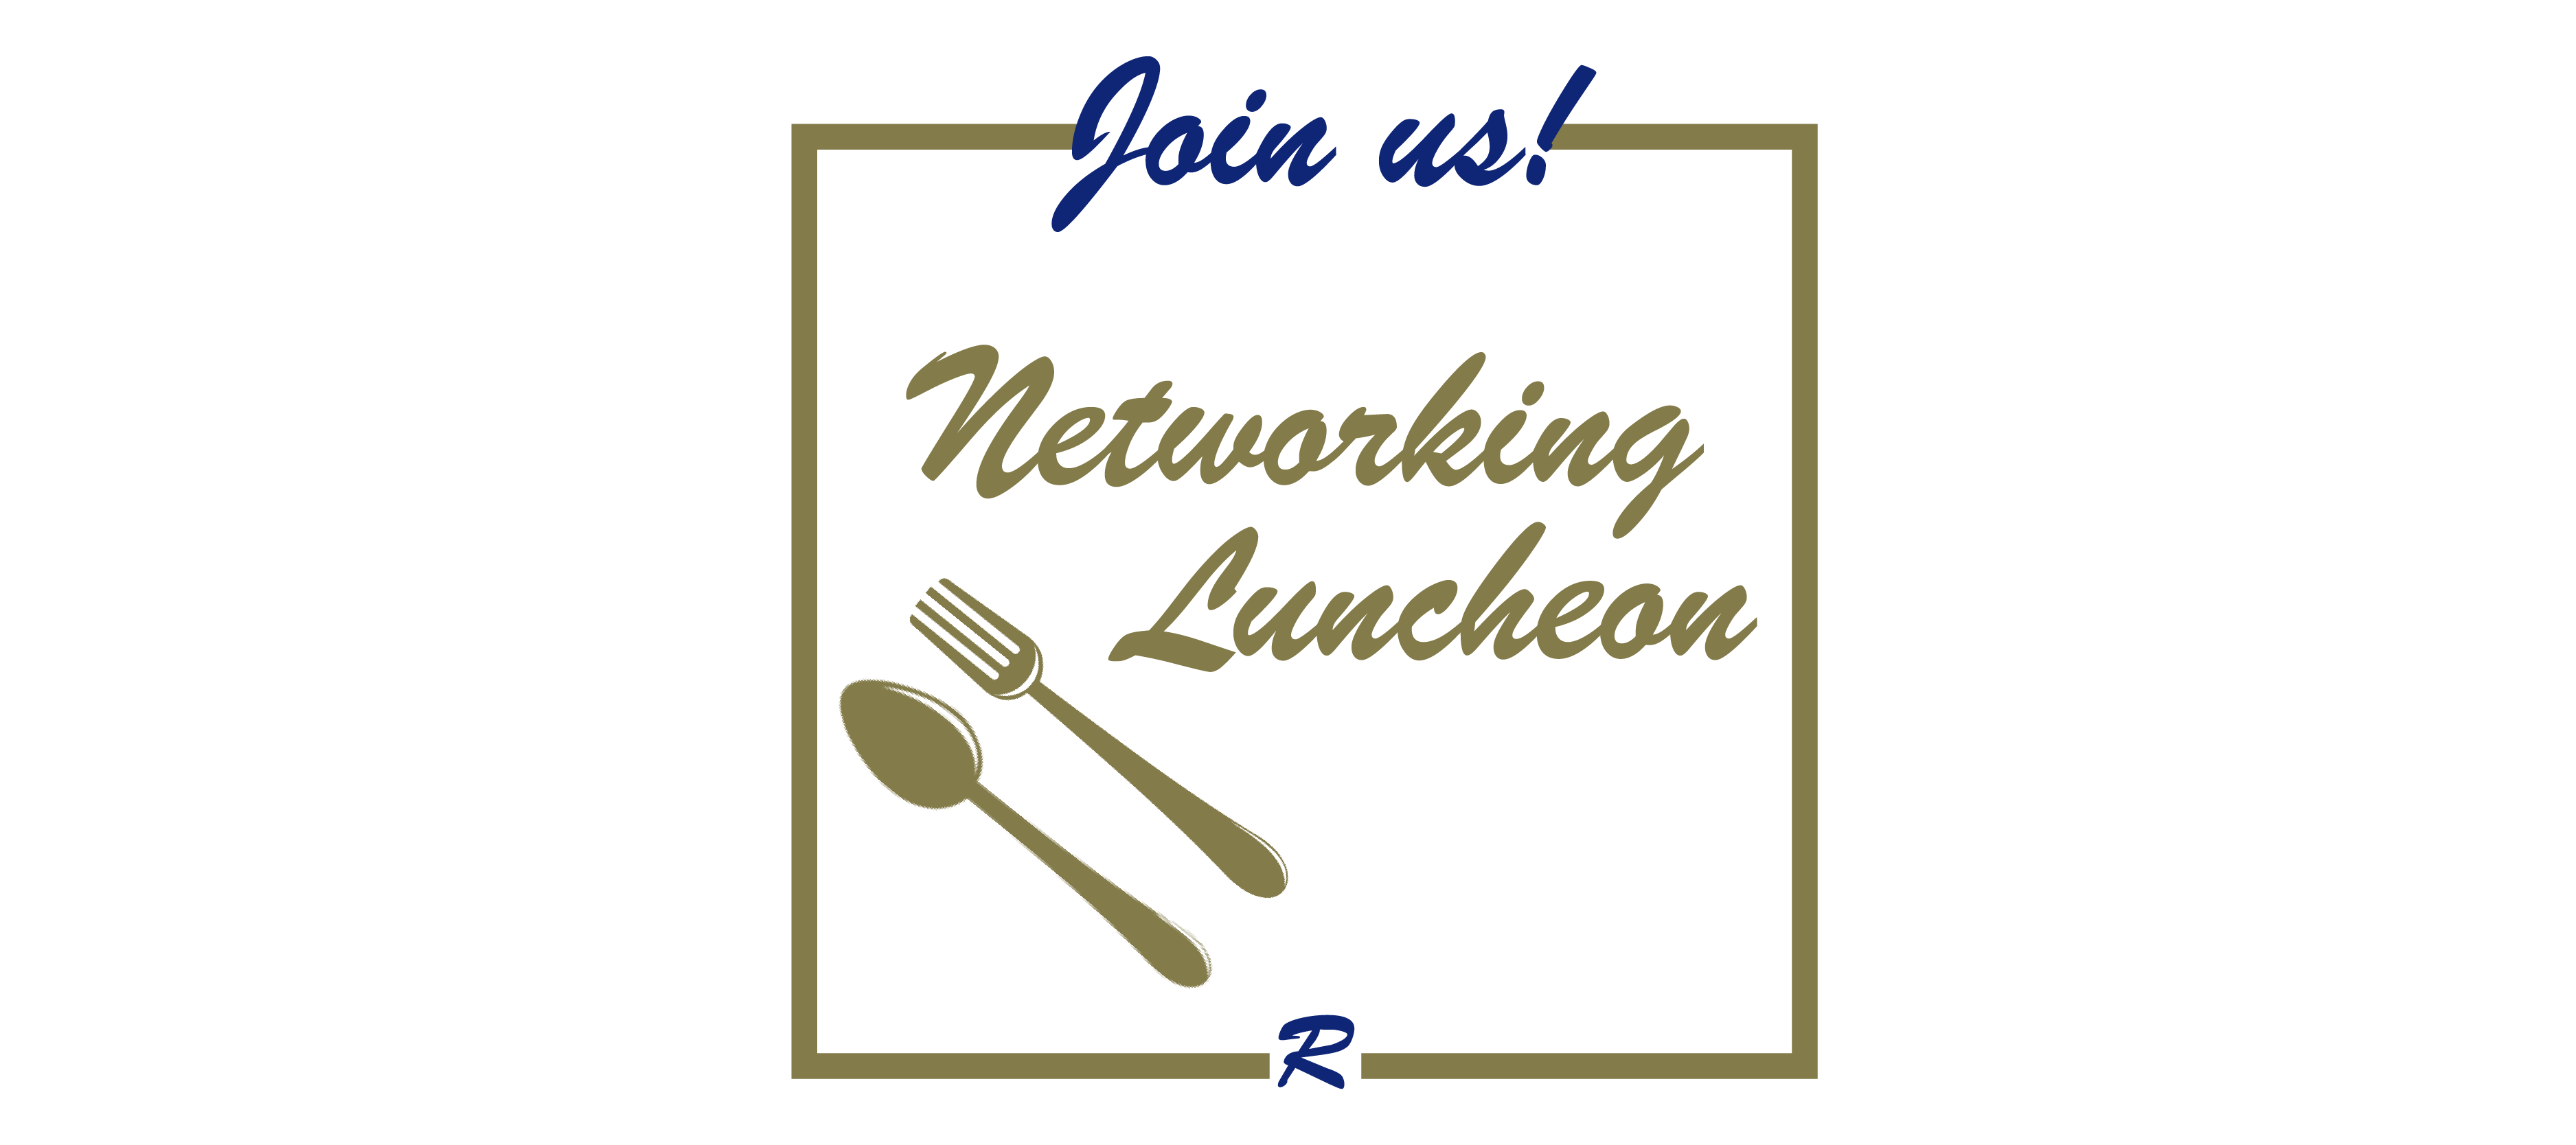 rcoc-networking-luncheon-events